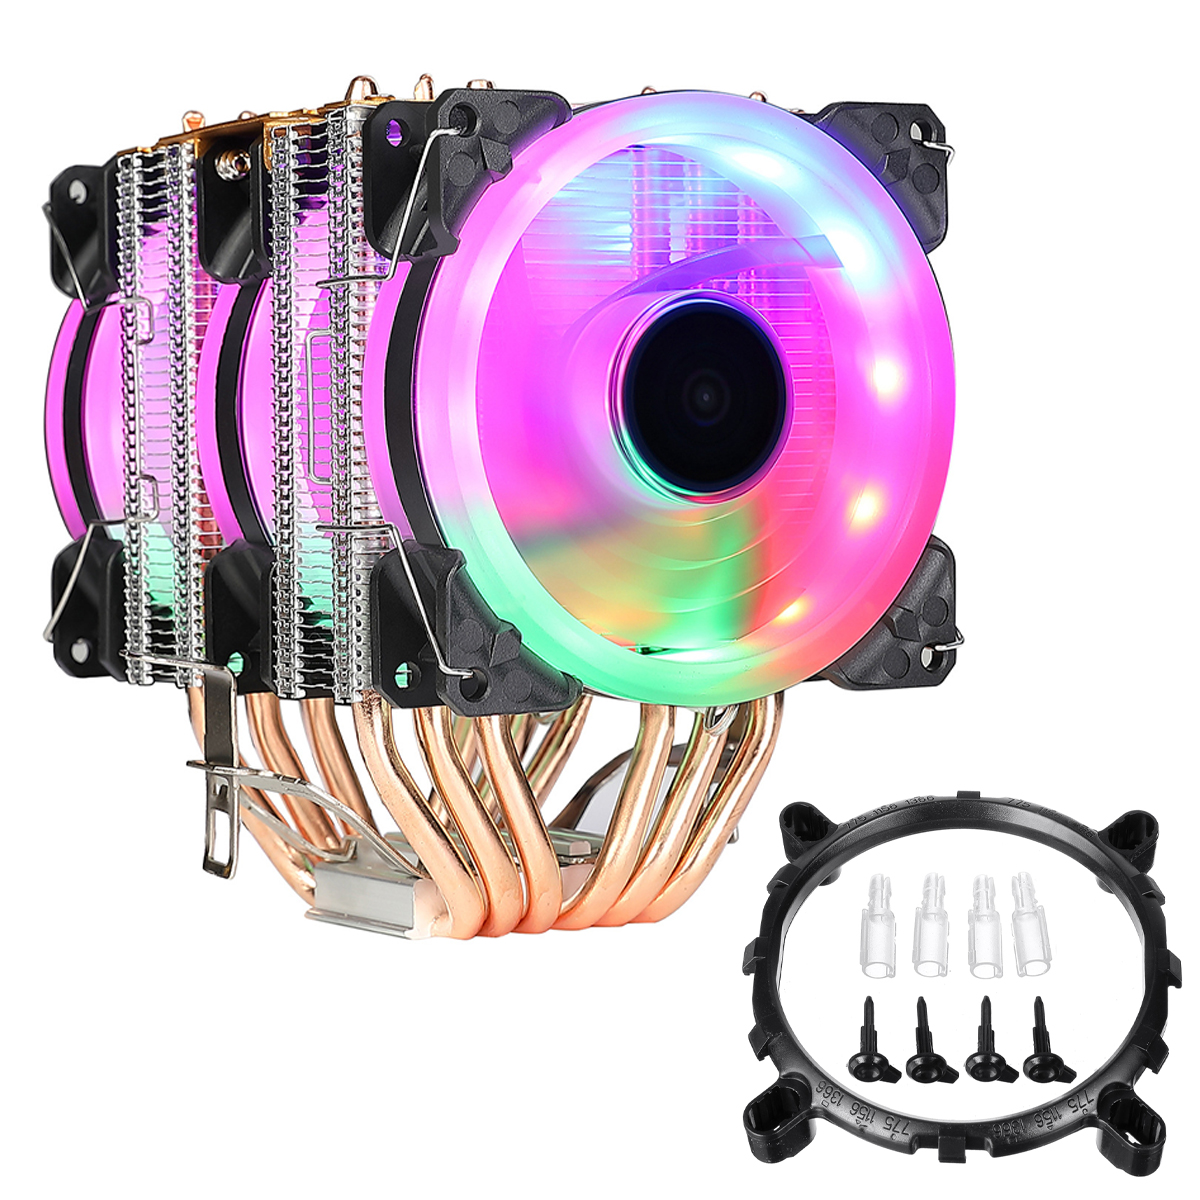 EVESKY-CPU-Cooling-Fan-123-Fans-34-Pin-6-Heat-Pipes-RGBWithout-Light-Silent-Computer-Case-Cooler-CPU-1937014-10